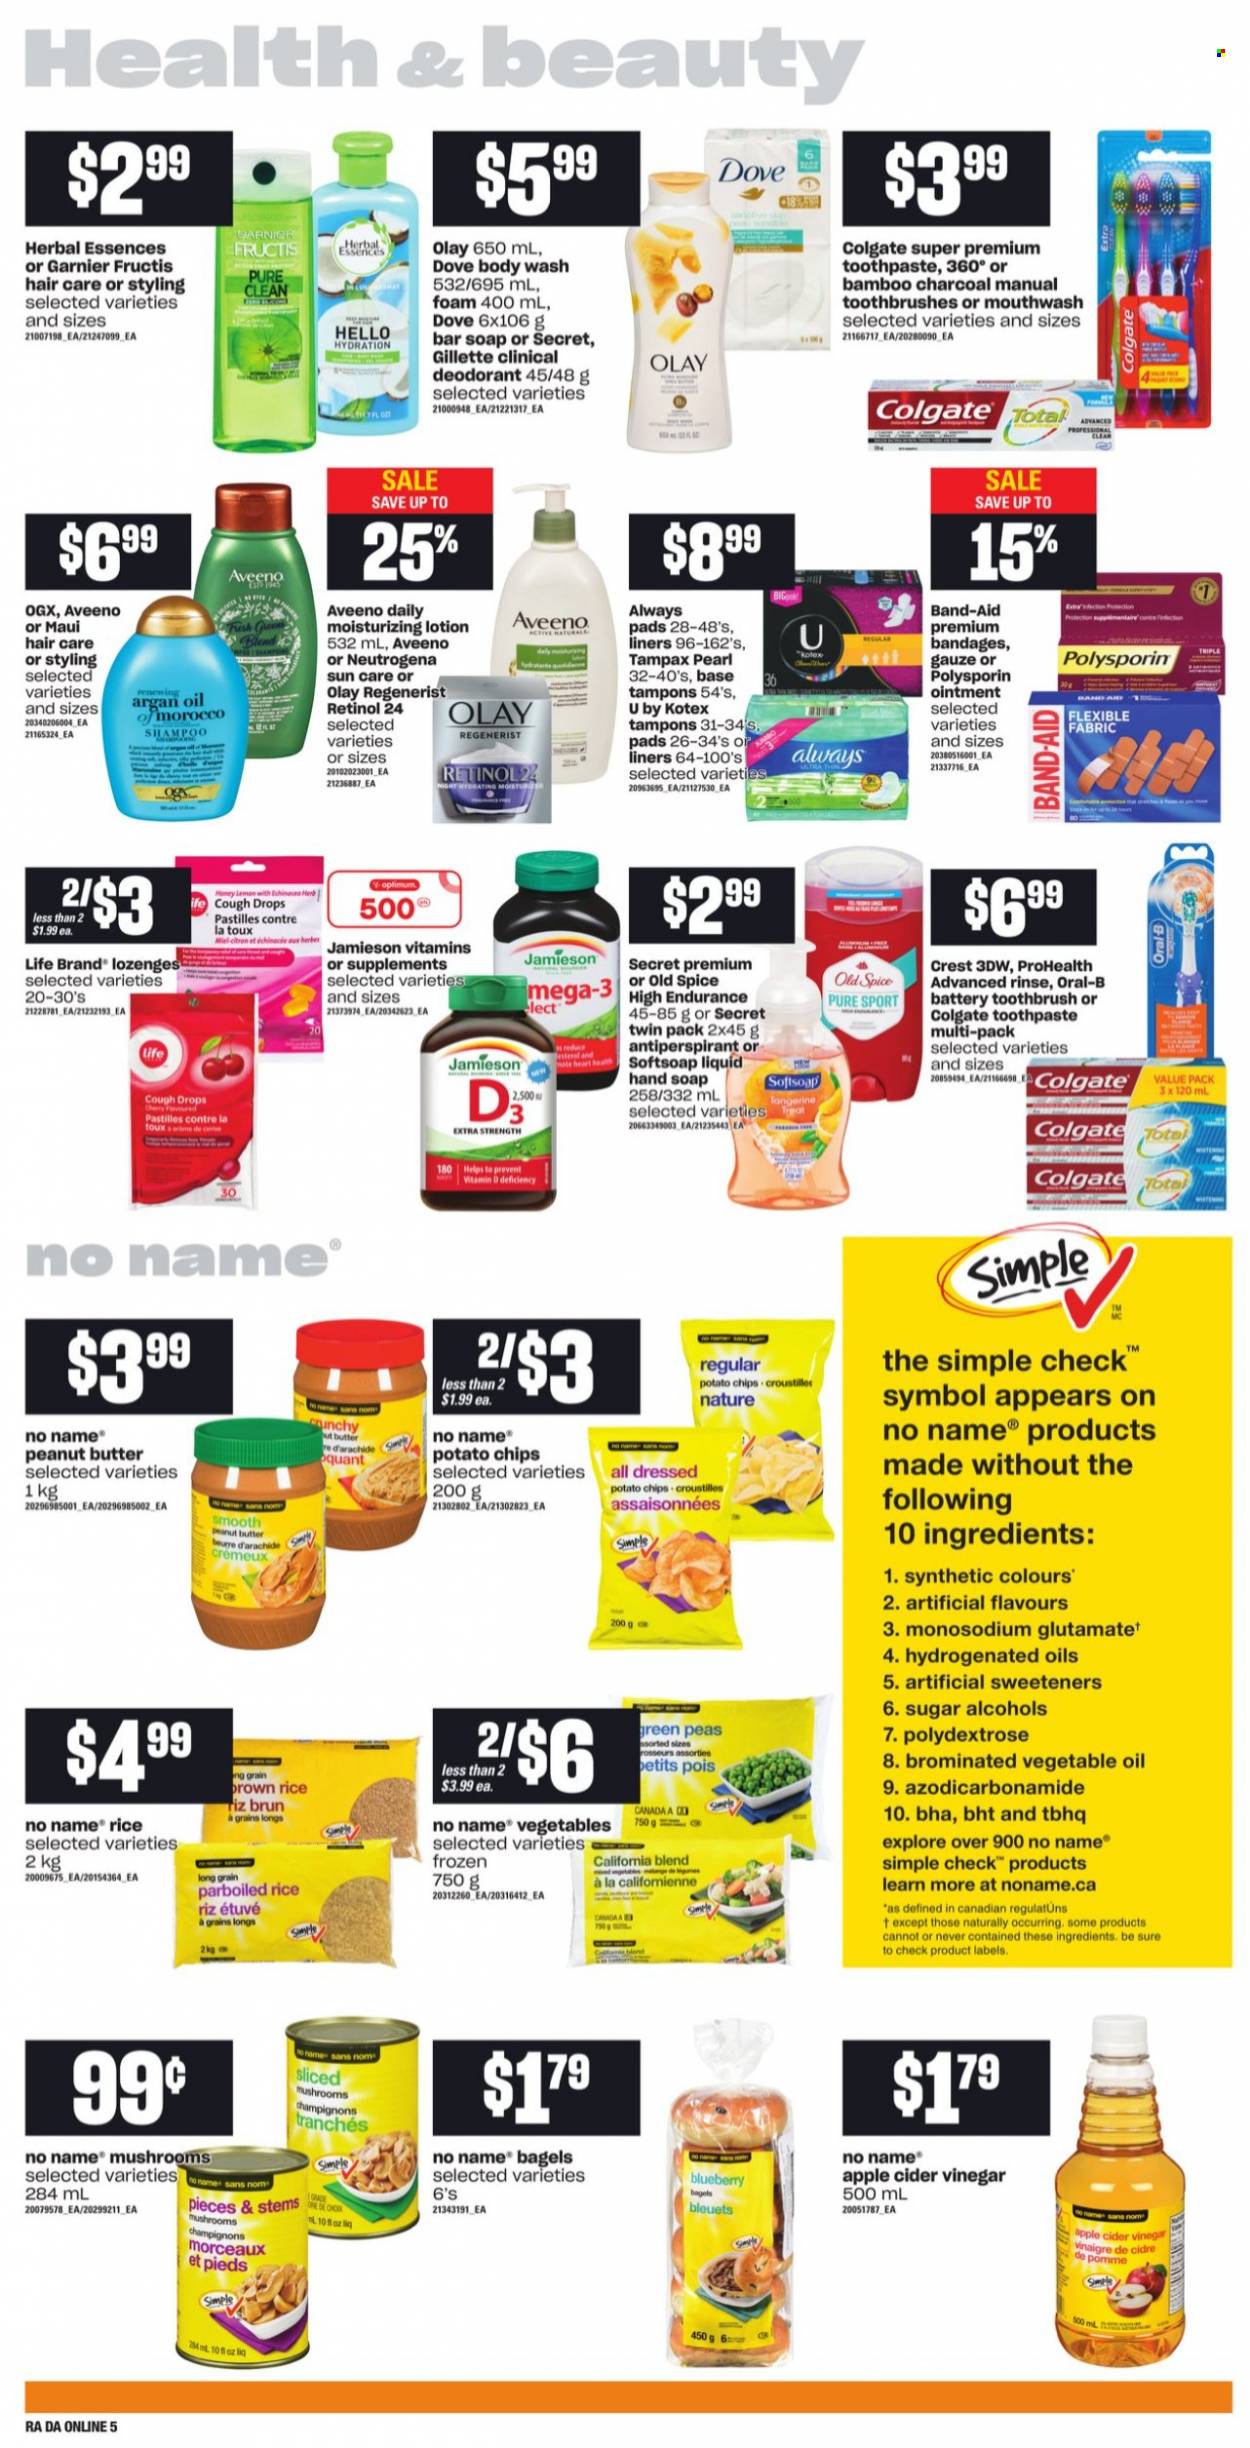 thumbnail - Atlantic Superstore Flyer - September 23, 2021 - September 29, 2021 - Sales products - bagels, No Name, pastilles, potato chips, sugar, rice, parboiled rice, spice, apple cider vinegar, vegetable oil, honey, peanut butter, Aveeno, ointment, body wash, Softsoap, hand soap, soap bar, soap, toothbrush, toothpaste, mouthwash, Crest, Always pads, Kotex, tampons, Olay, OGX, Herbal Essences, Fructis, body lotion, anti-perspirant, Sure, Optimum, argan oil, cough drops, band-aid, Dove, Colgate, Garnier, Gillette, Neutrogena, shampoo, Tampax, Old Spice, Oral-B, deodorant. Page 9.